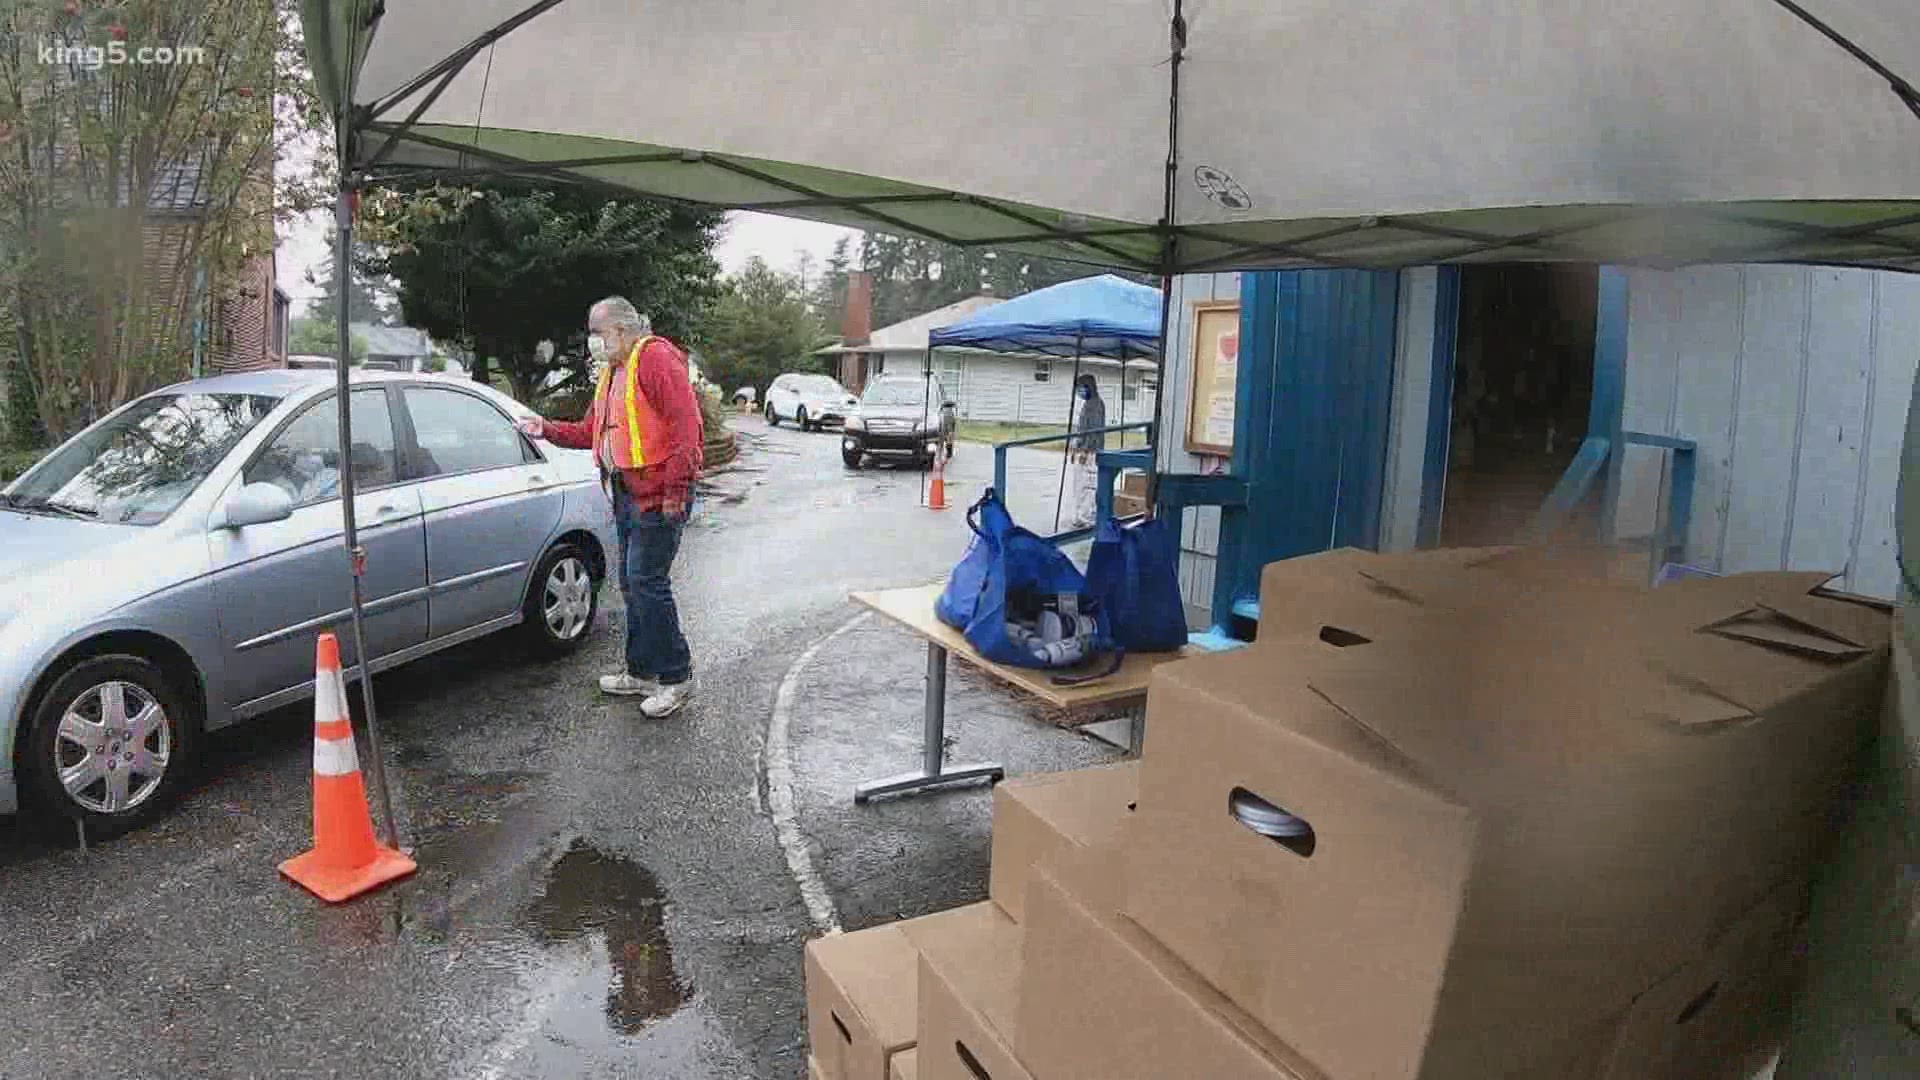 The Faith Food Bank in Everett is supported by volunteers, who during the pandemic, have stepped more than ever before.